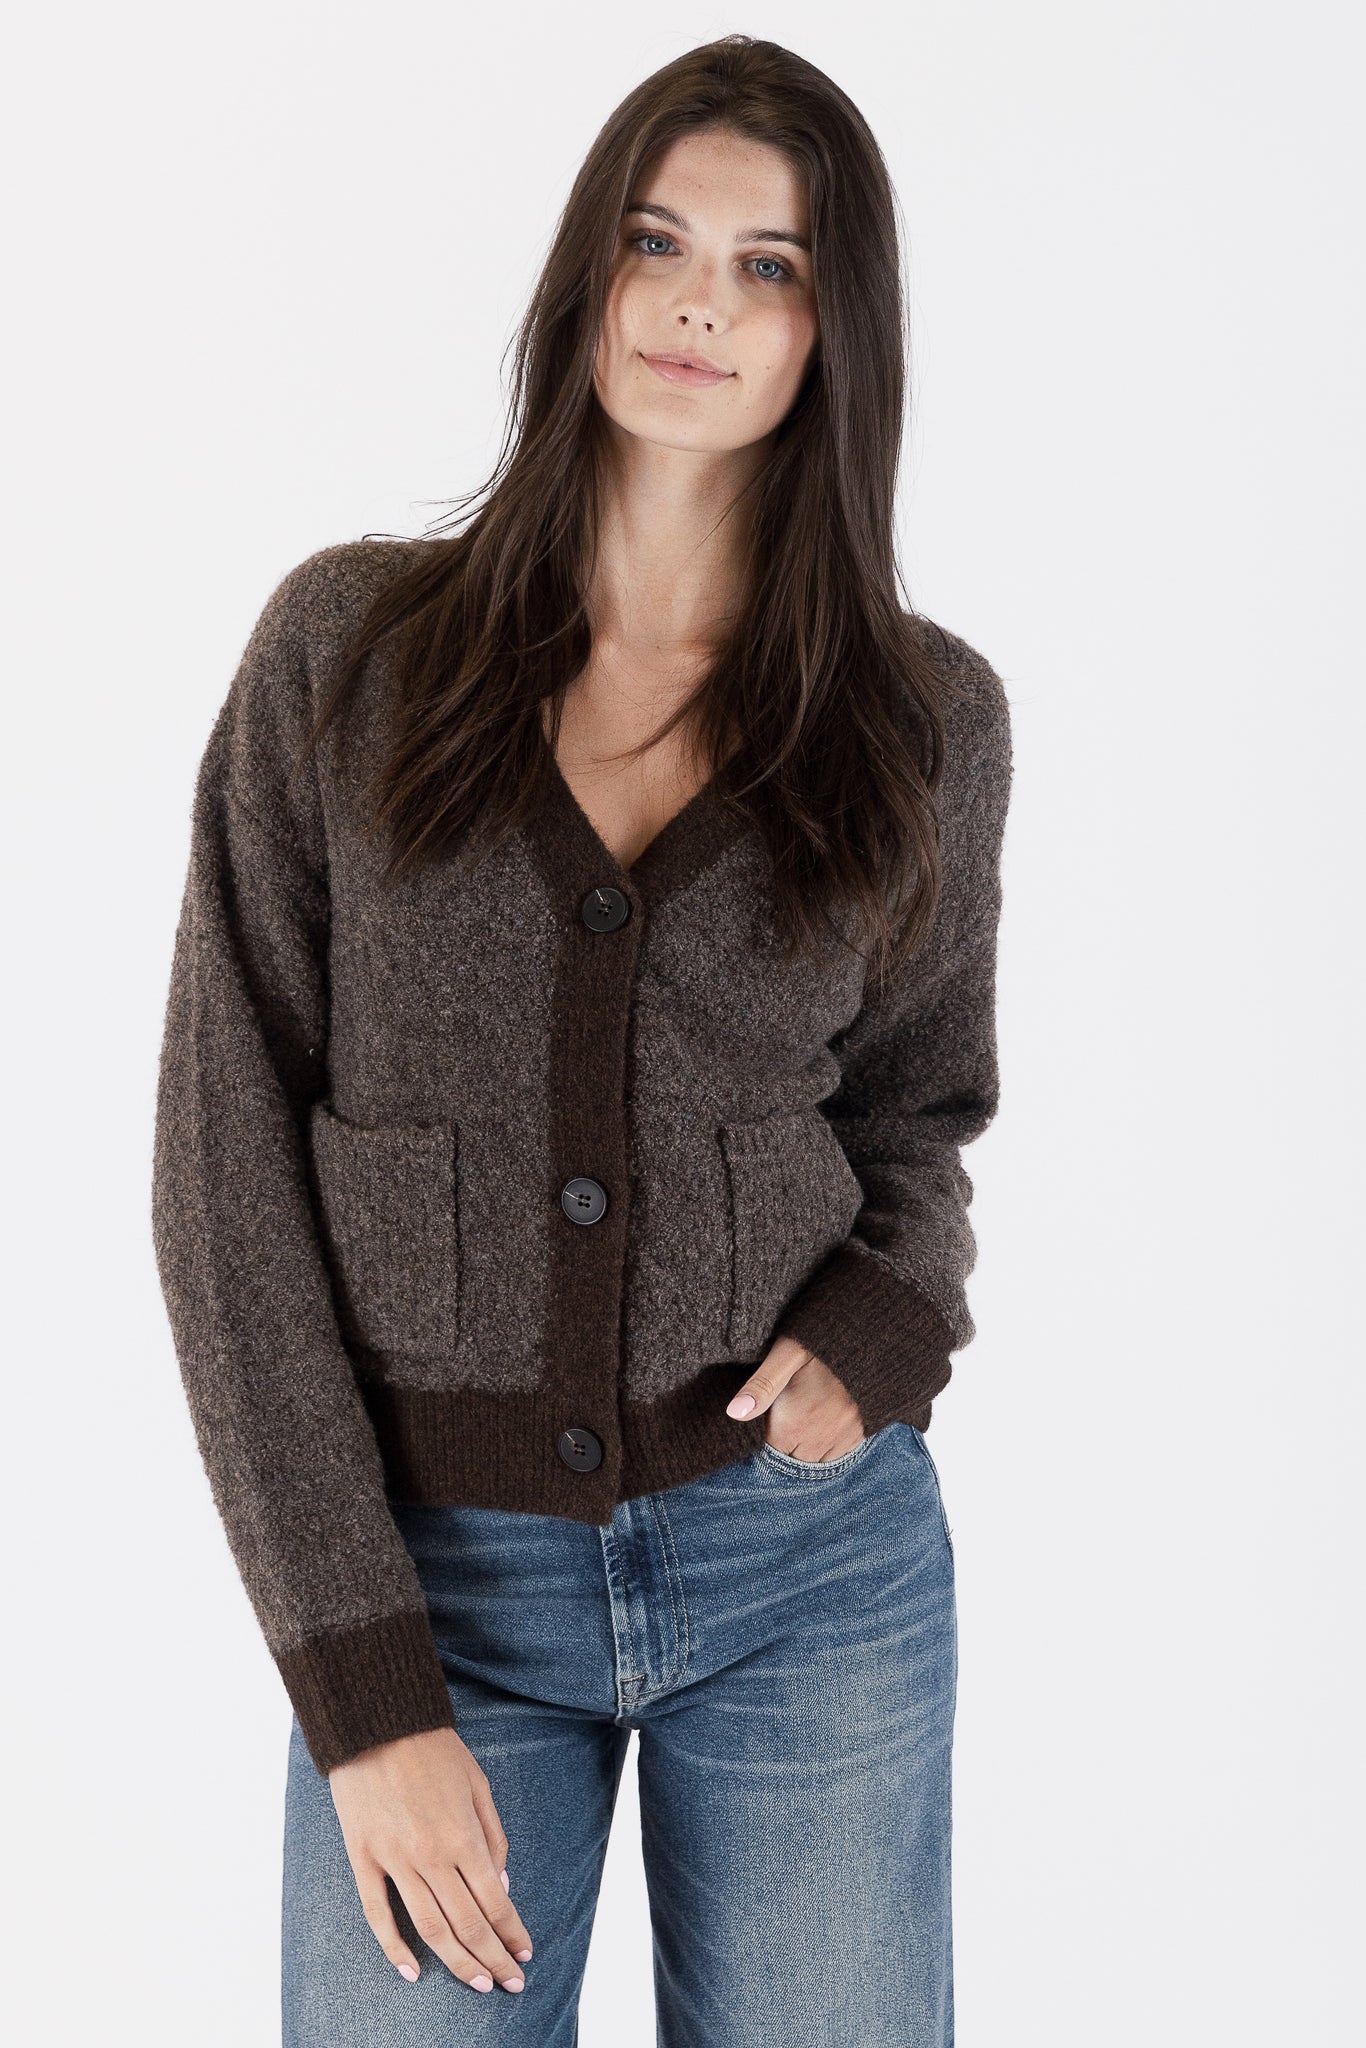 Photo of model wearing Nova Two Toned Cardigan in brown colours available at UniKoncept in Waterloo front view